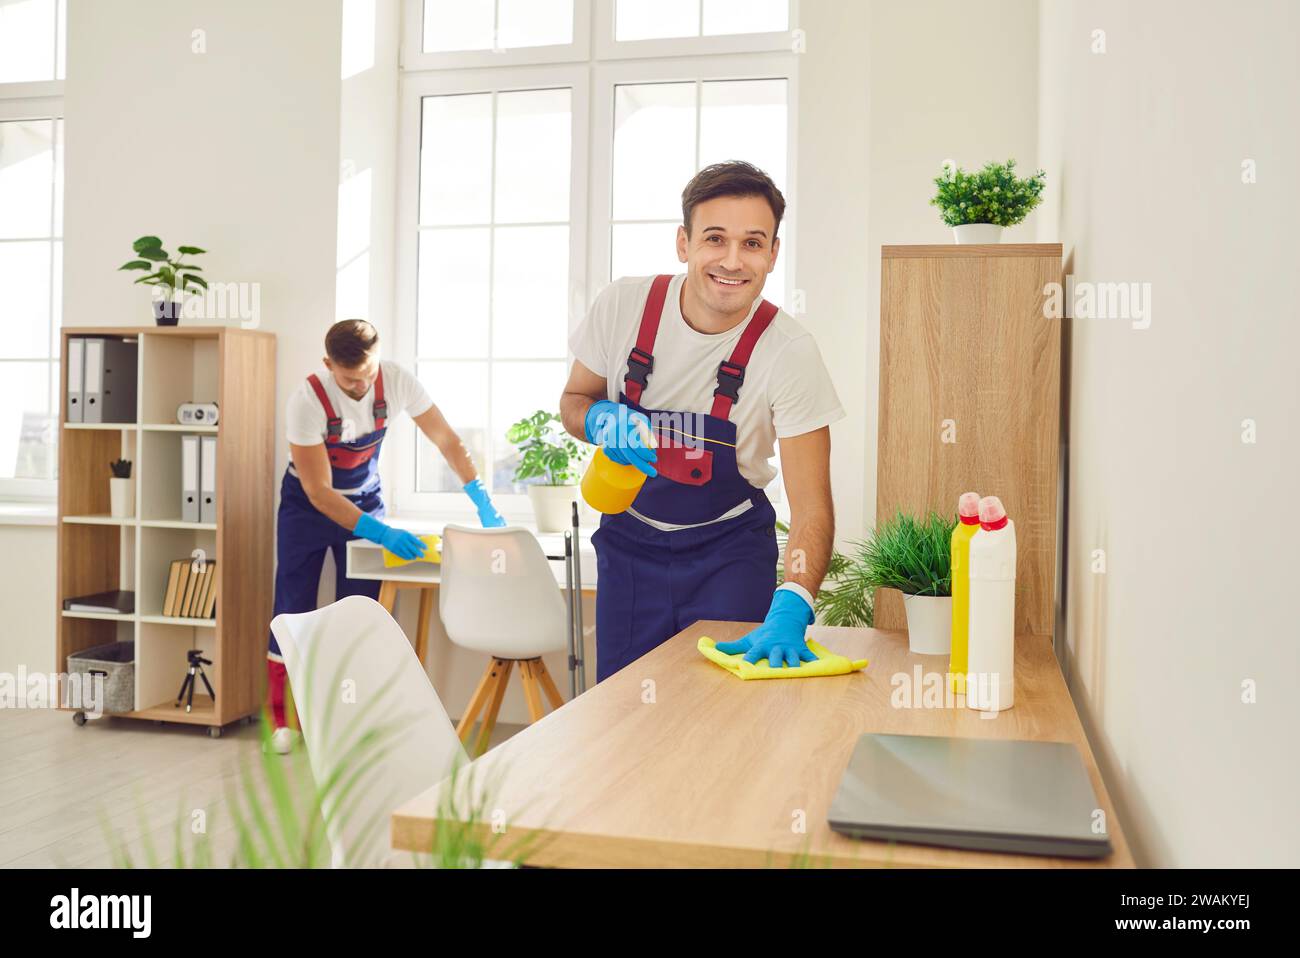 Two happy professional janitors in uniforms cleaning office tables with sanitizer Stock Photo